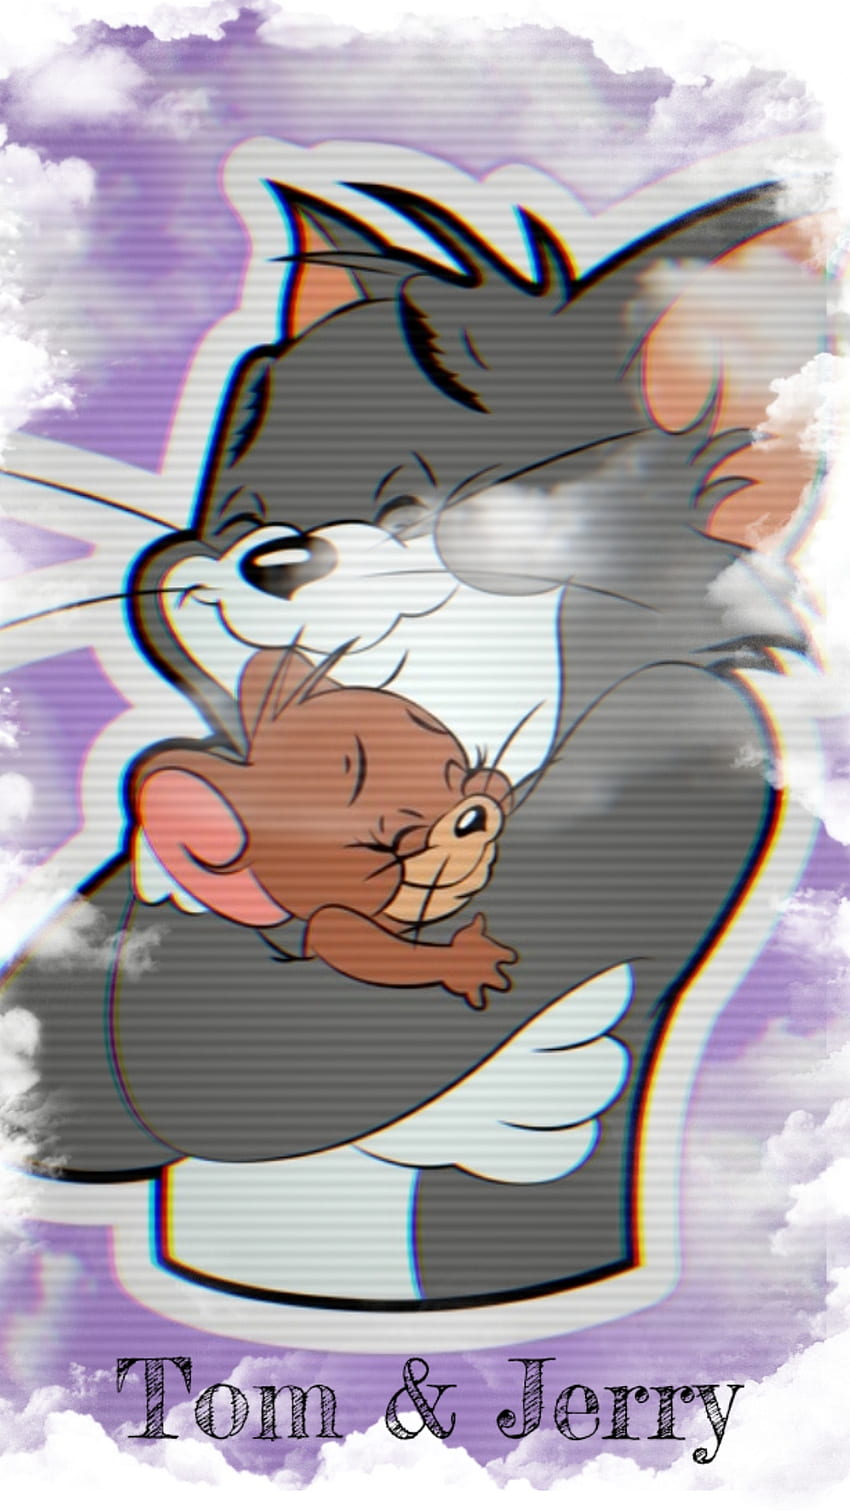 Tom And Jerry As Small Babies Desktop Hd Wallpaper For Mobile Phones Tablet  And Pc 2560x1600  Wallpapers13com